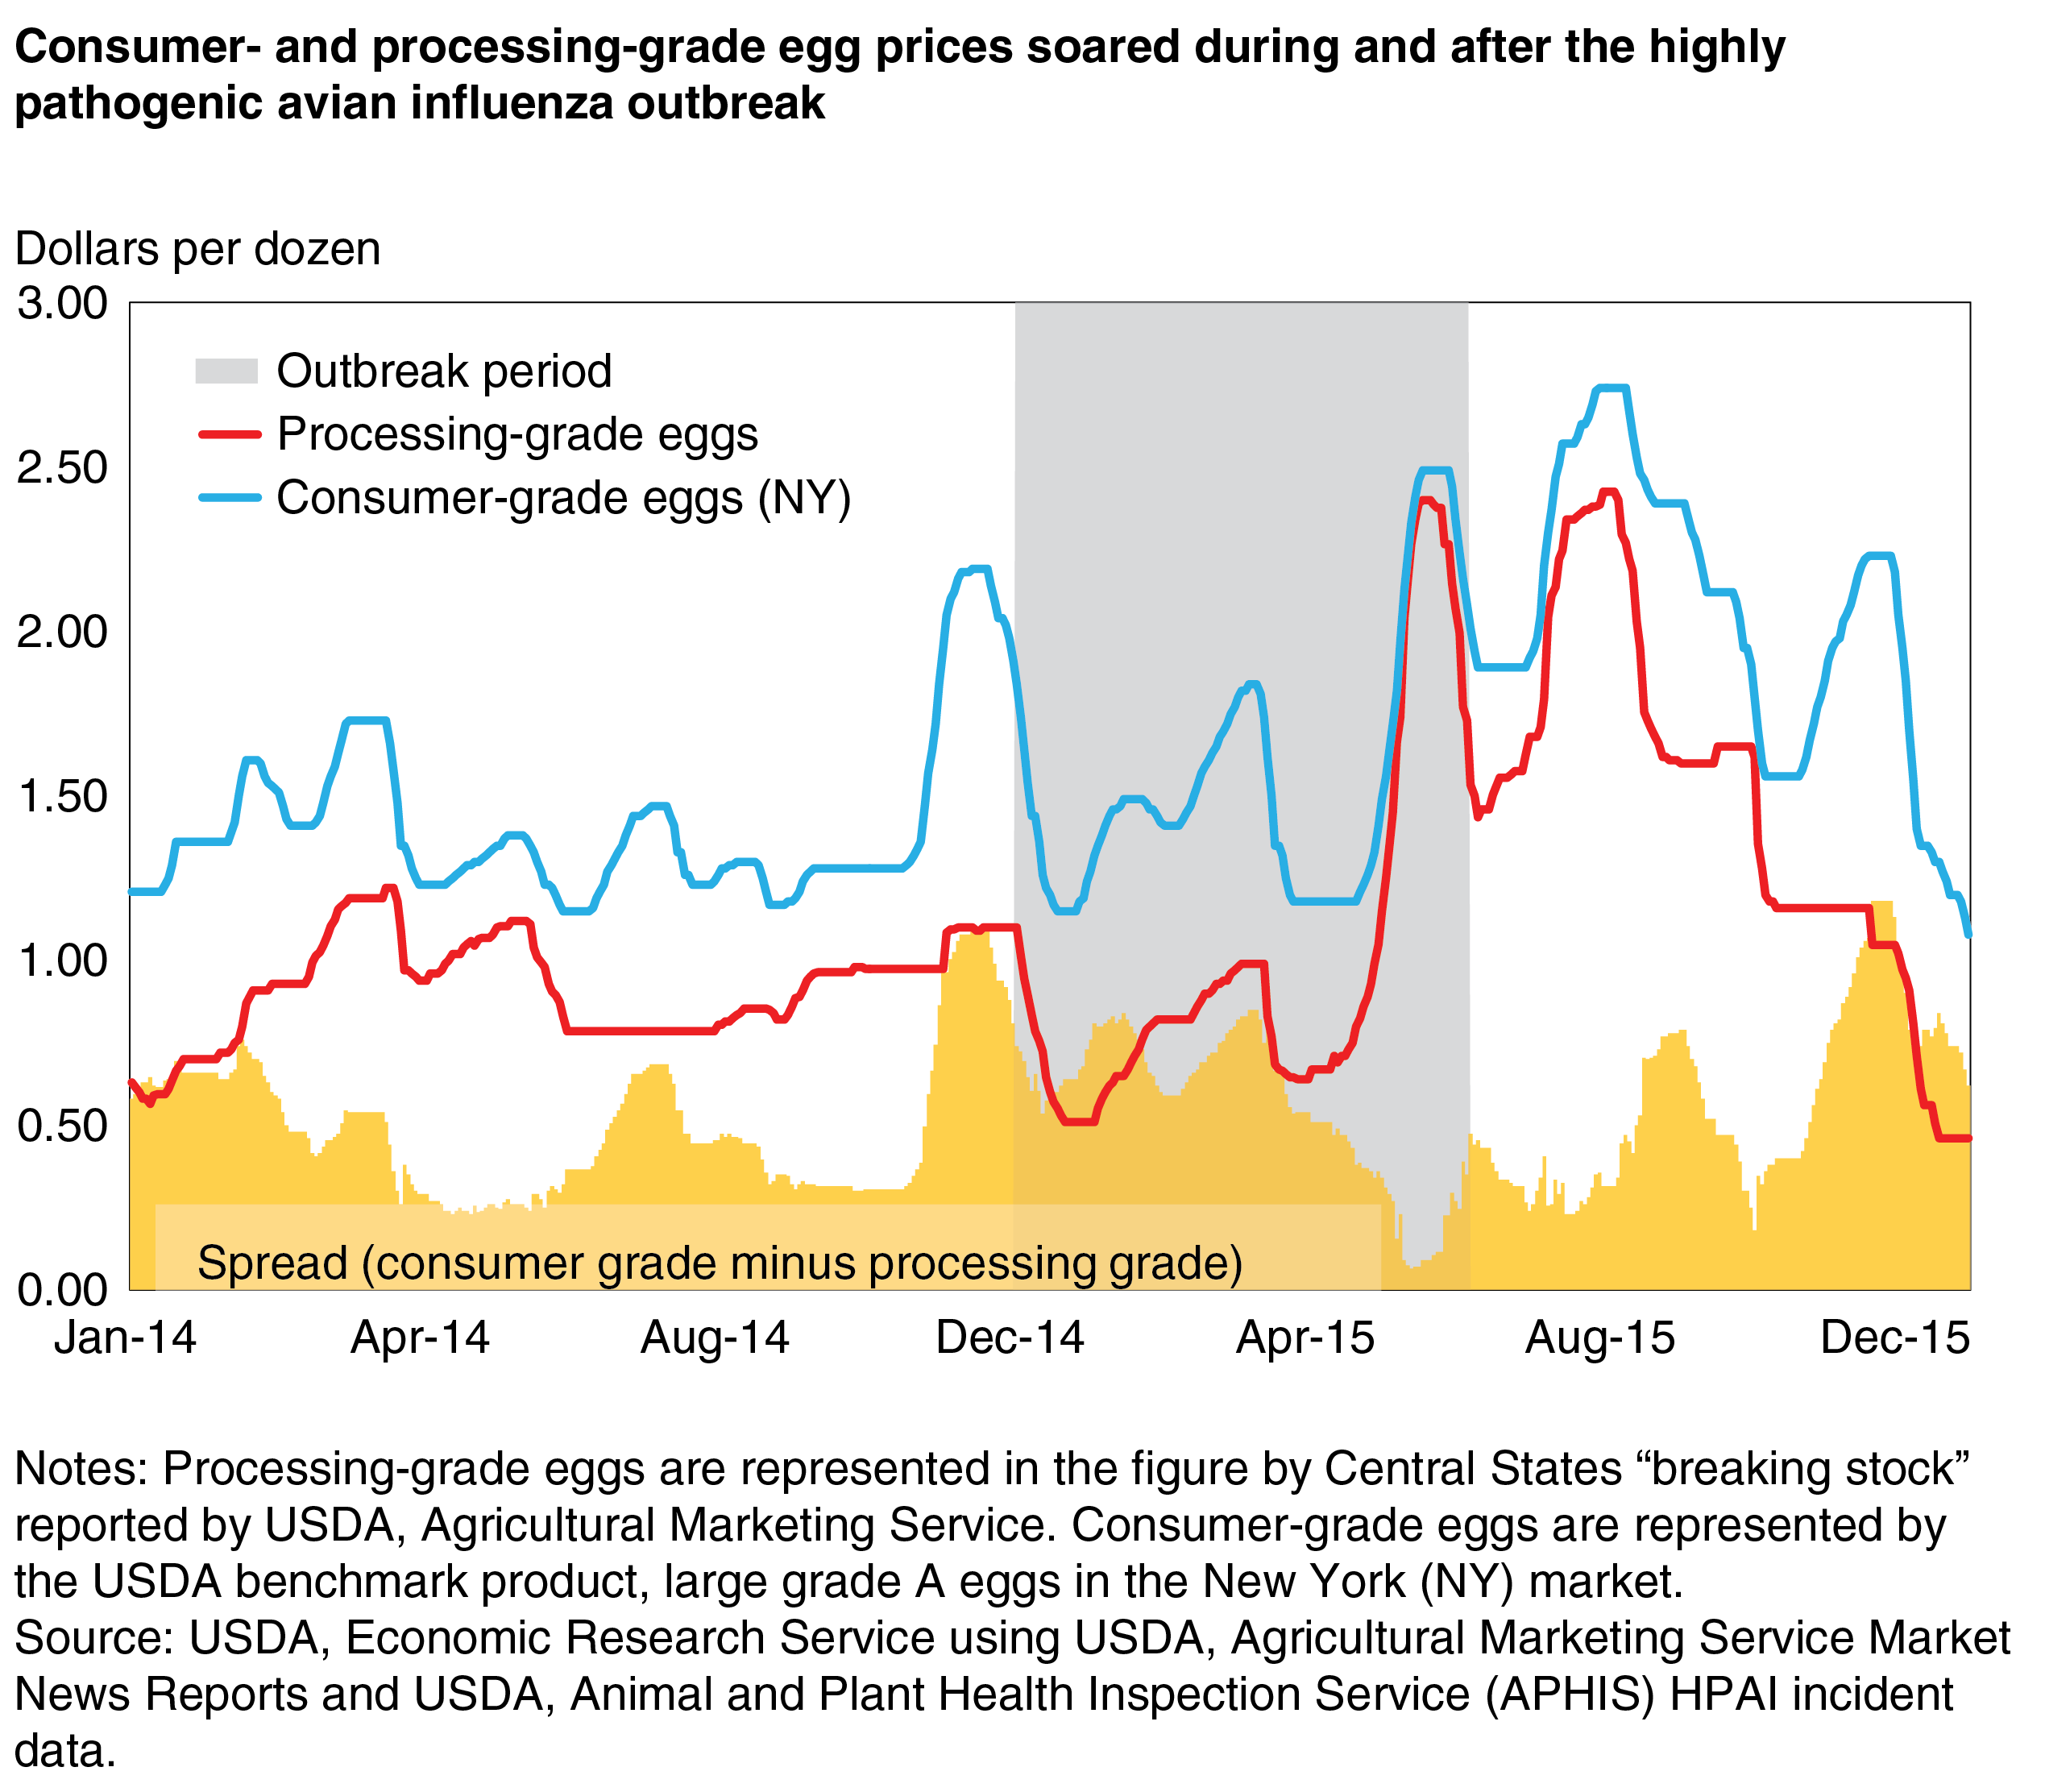 USDA ERS Egg Price Impacts of the 201415 Highly Pathogenic Avian